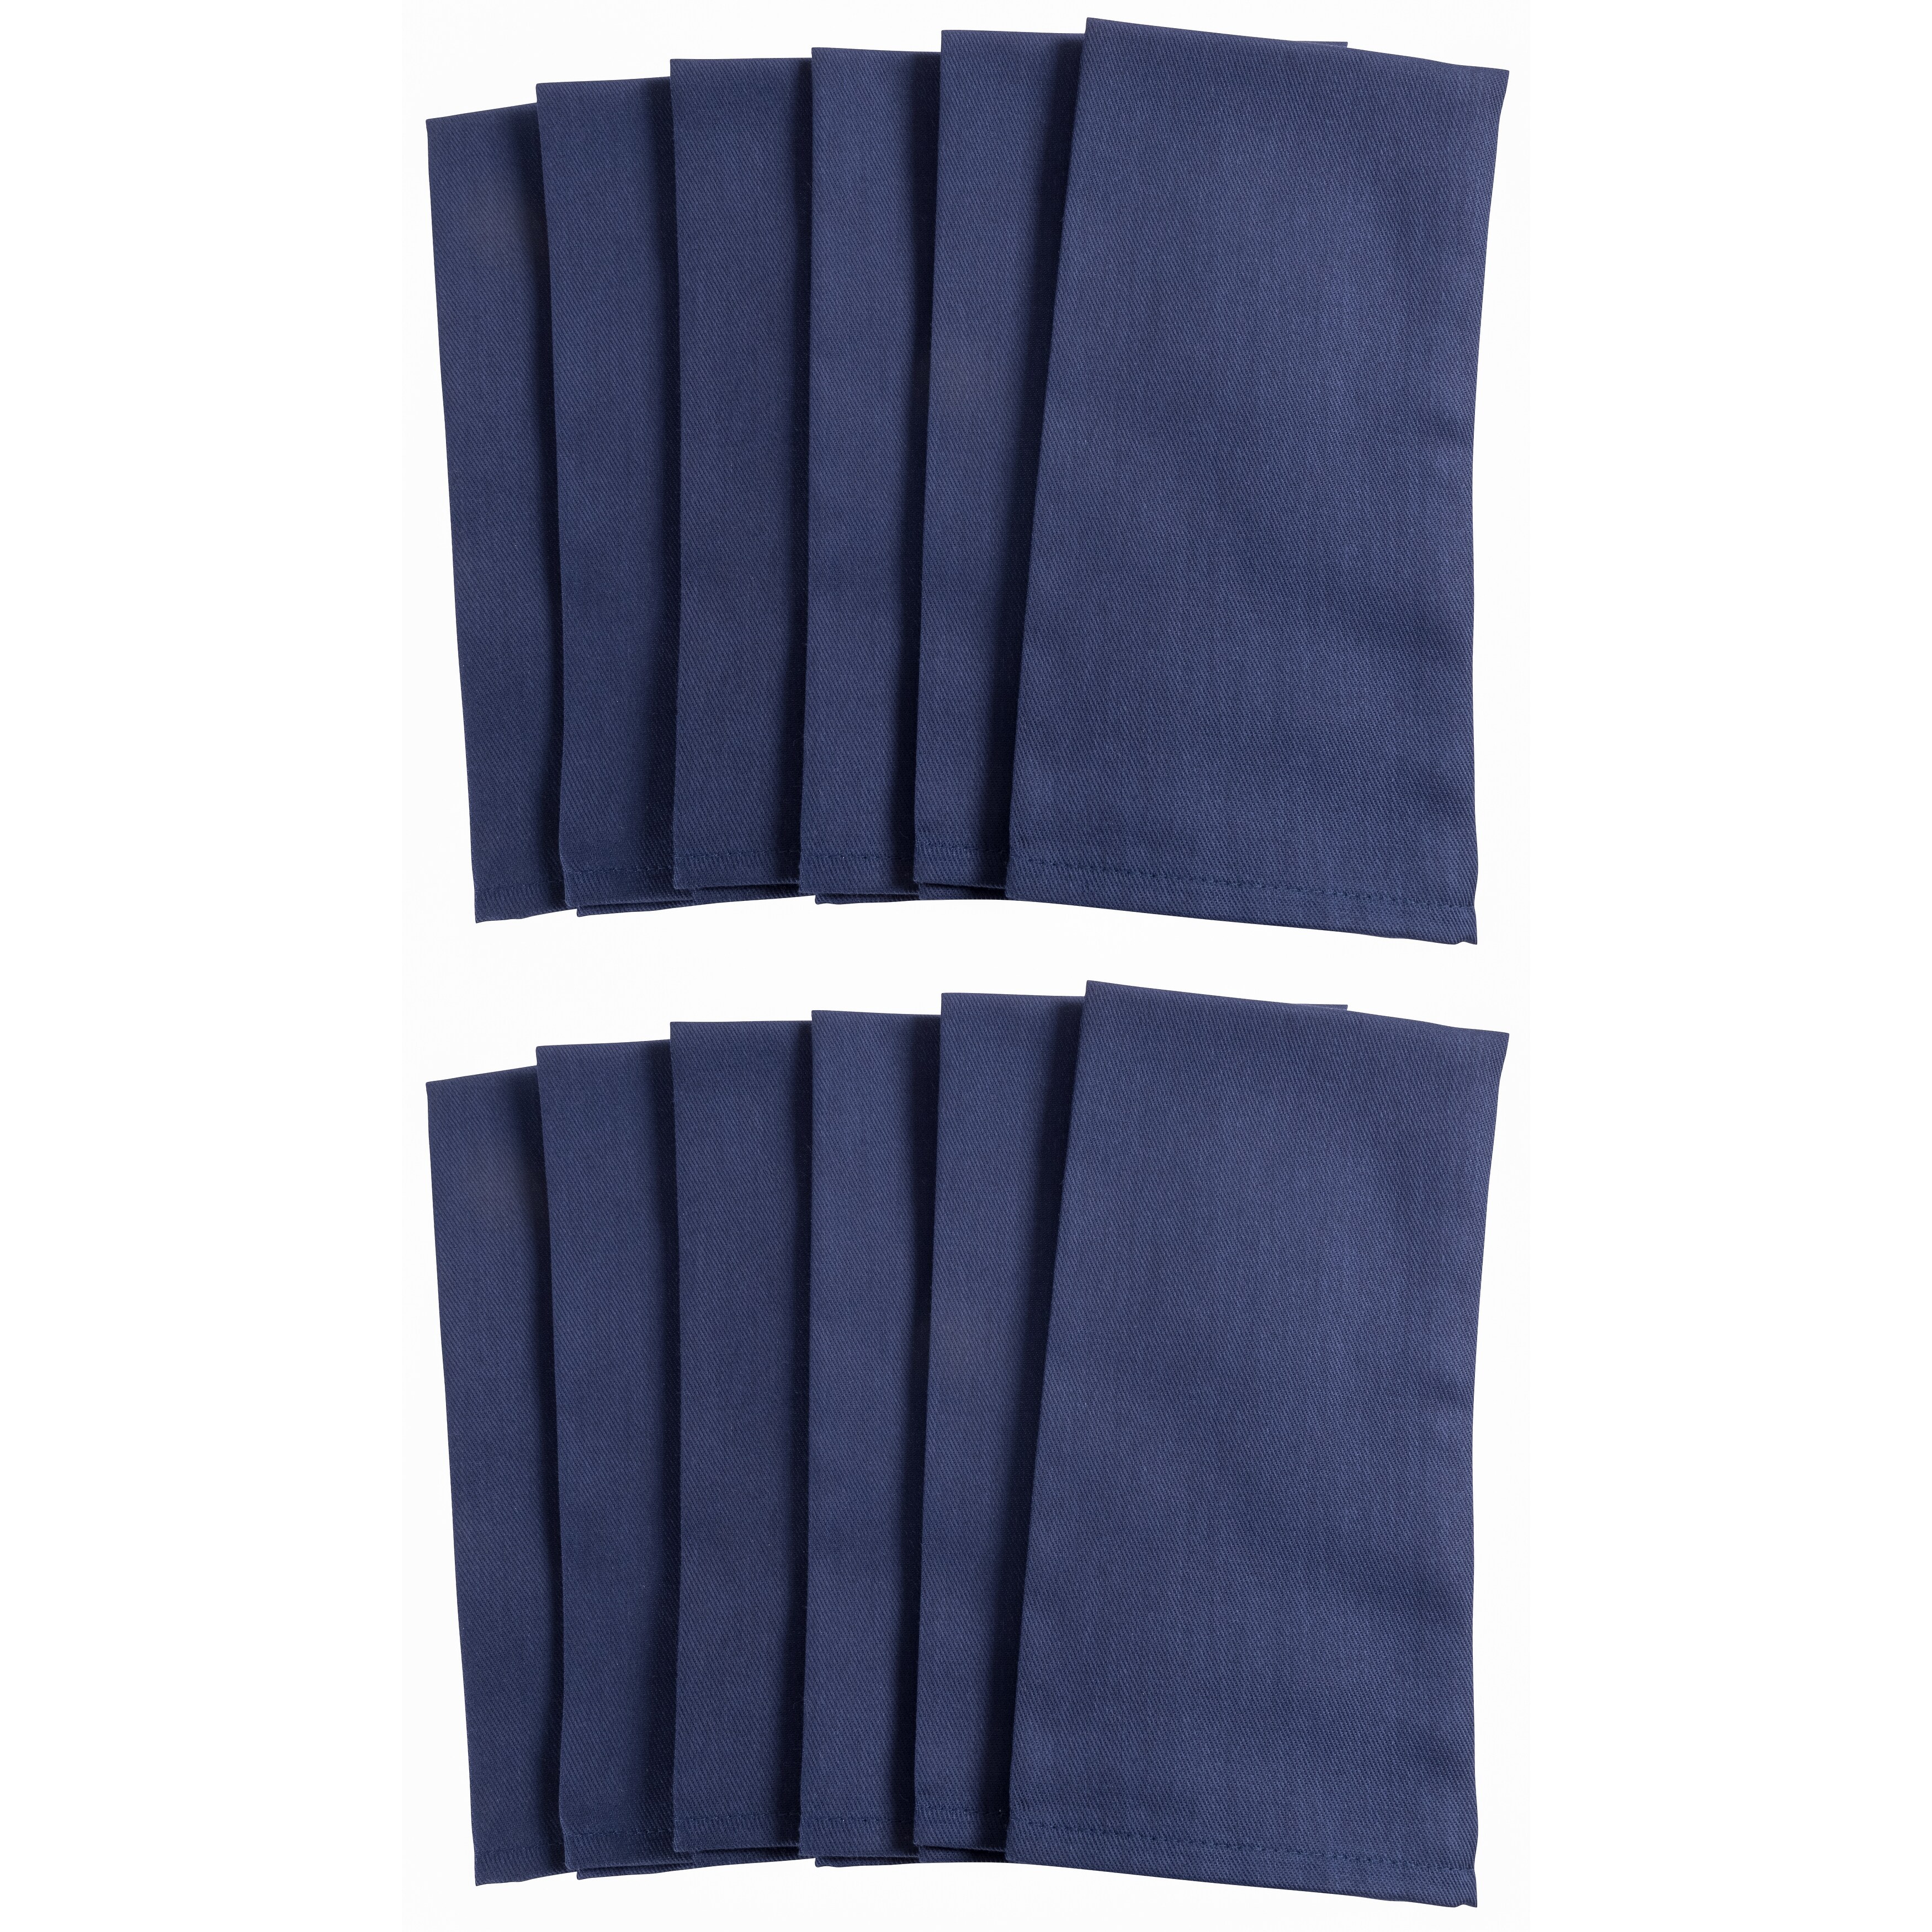 https://ak1.ostkcdn.com/images/products/is/images/direct/b7230d8f350d9479bbf677958508dabad9a96c52/Chateau-Easycare-Poly-Cotton-Napkins%2C-Set-of-12.jpg